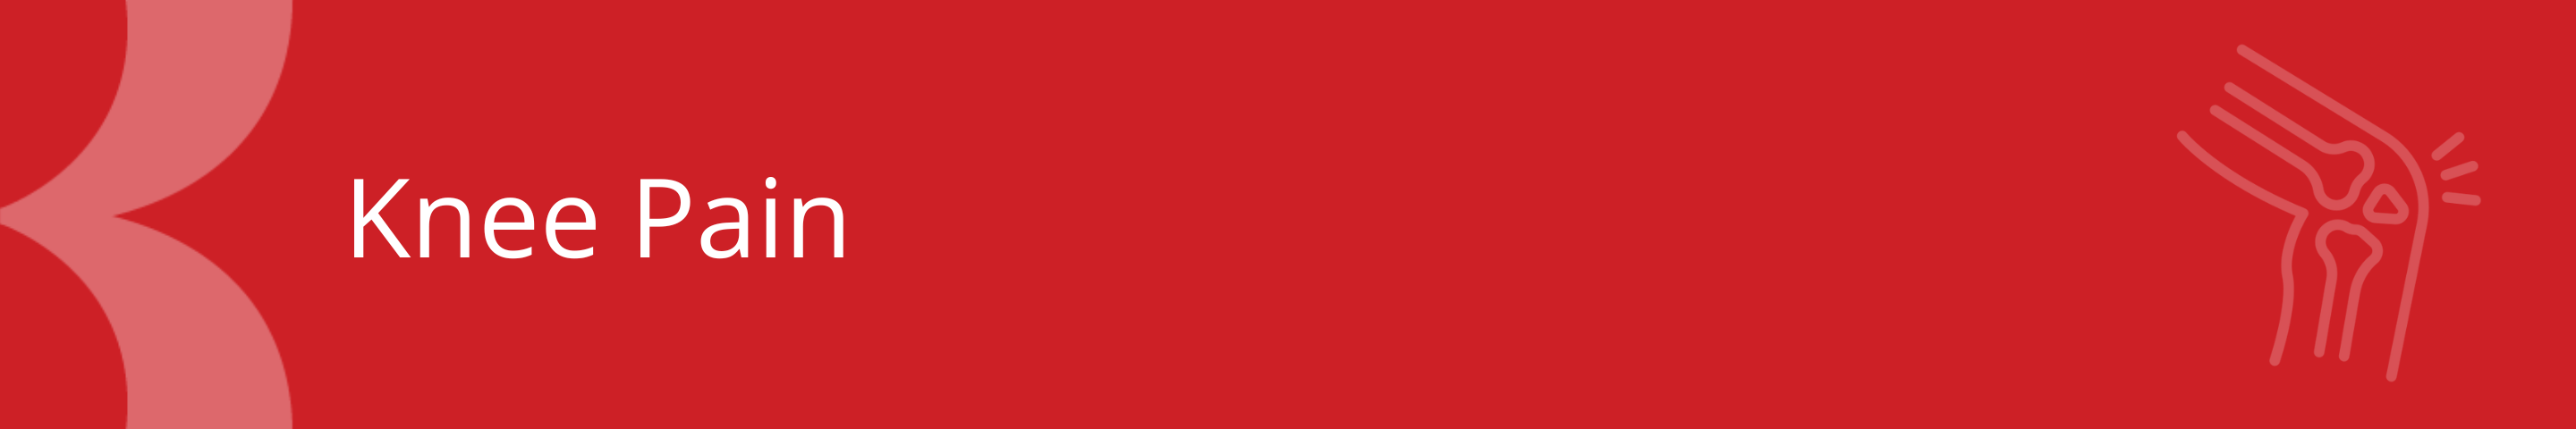 Red banner with a shape of a human knee